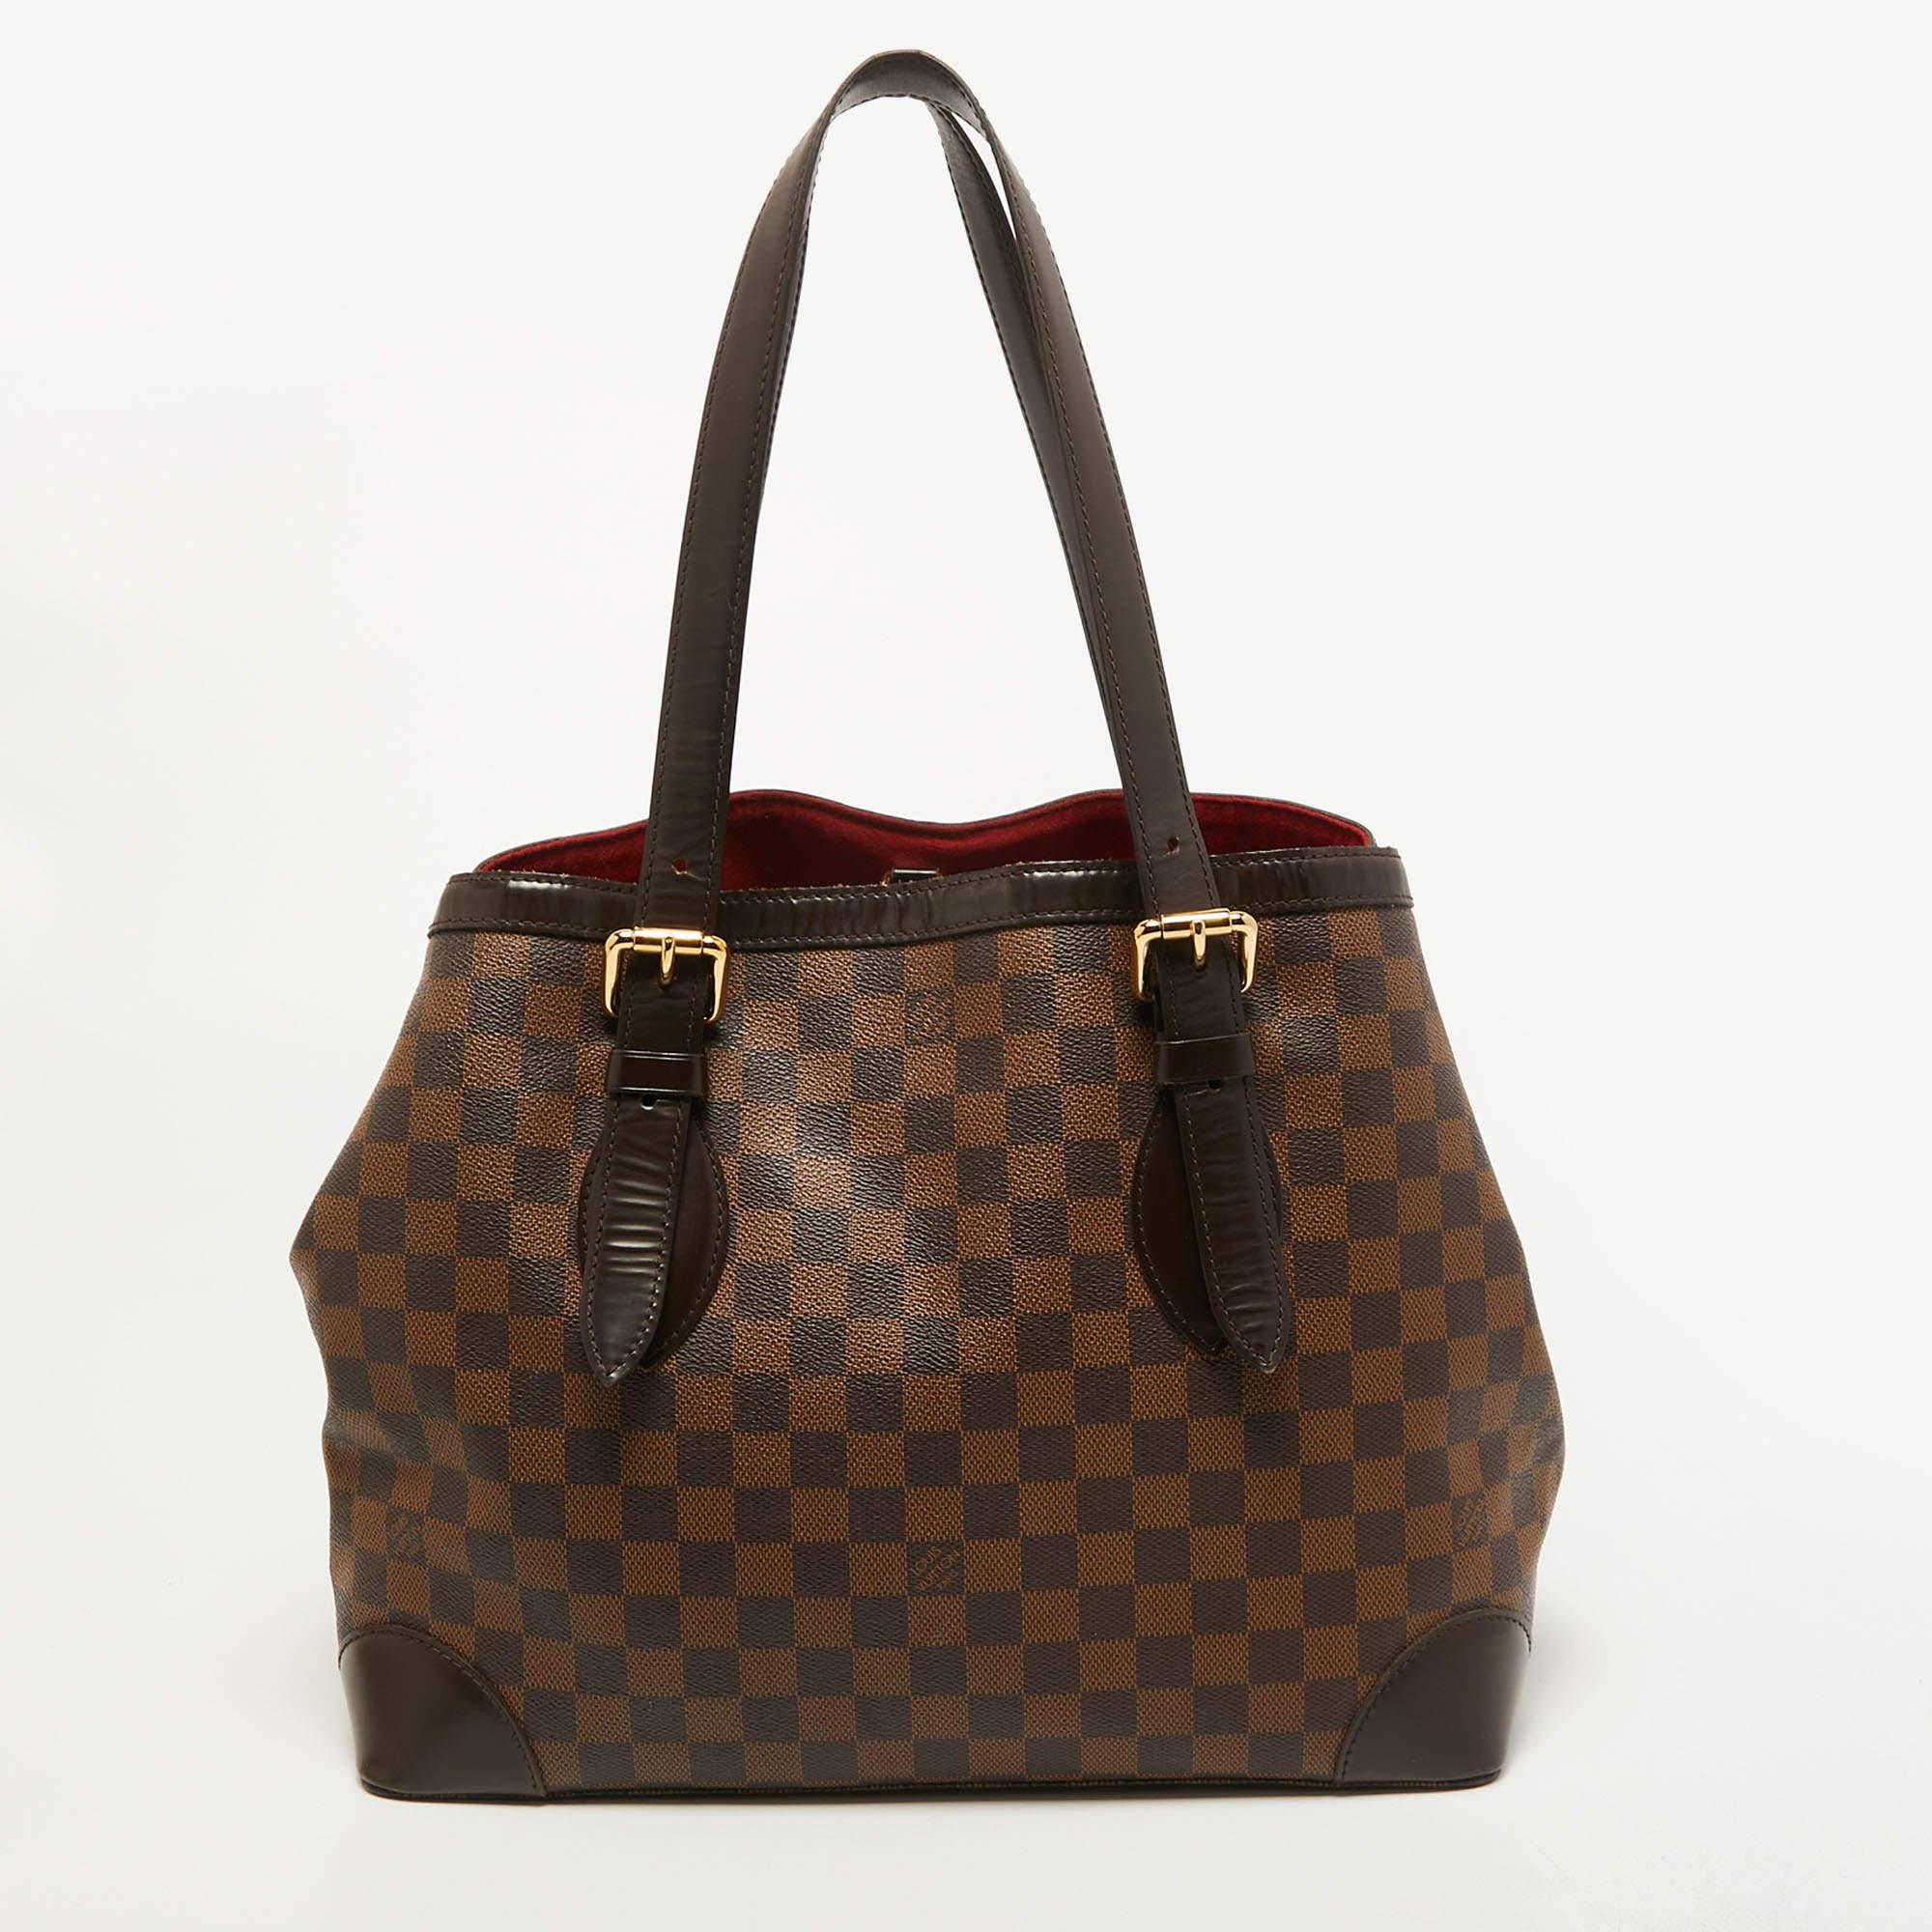 Perfect for conveniently housing your essentials in one place, this Louis Vuitton accessory is a worthy investment. It has notable details and offers a look of luxury.

